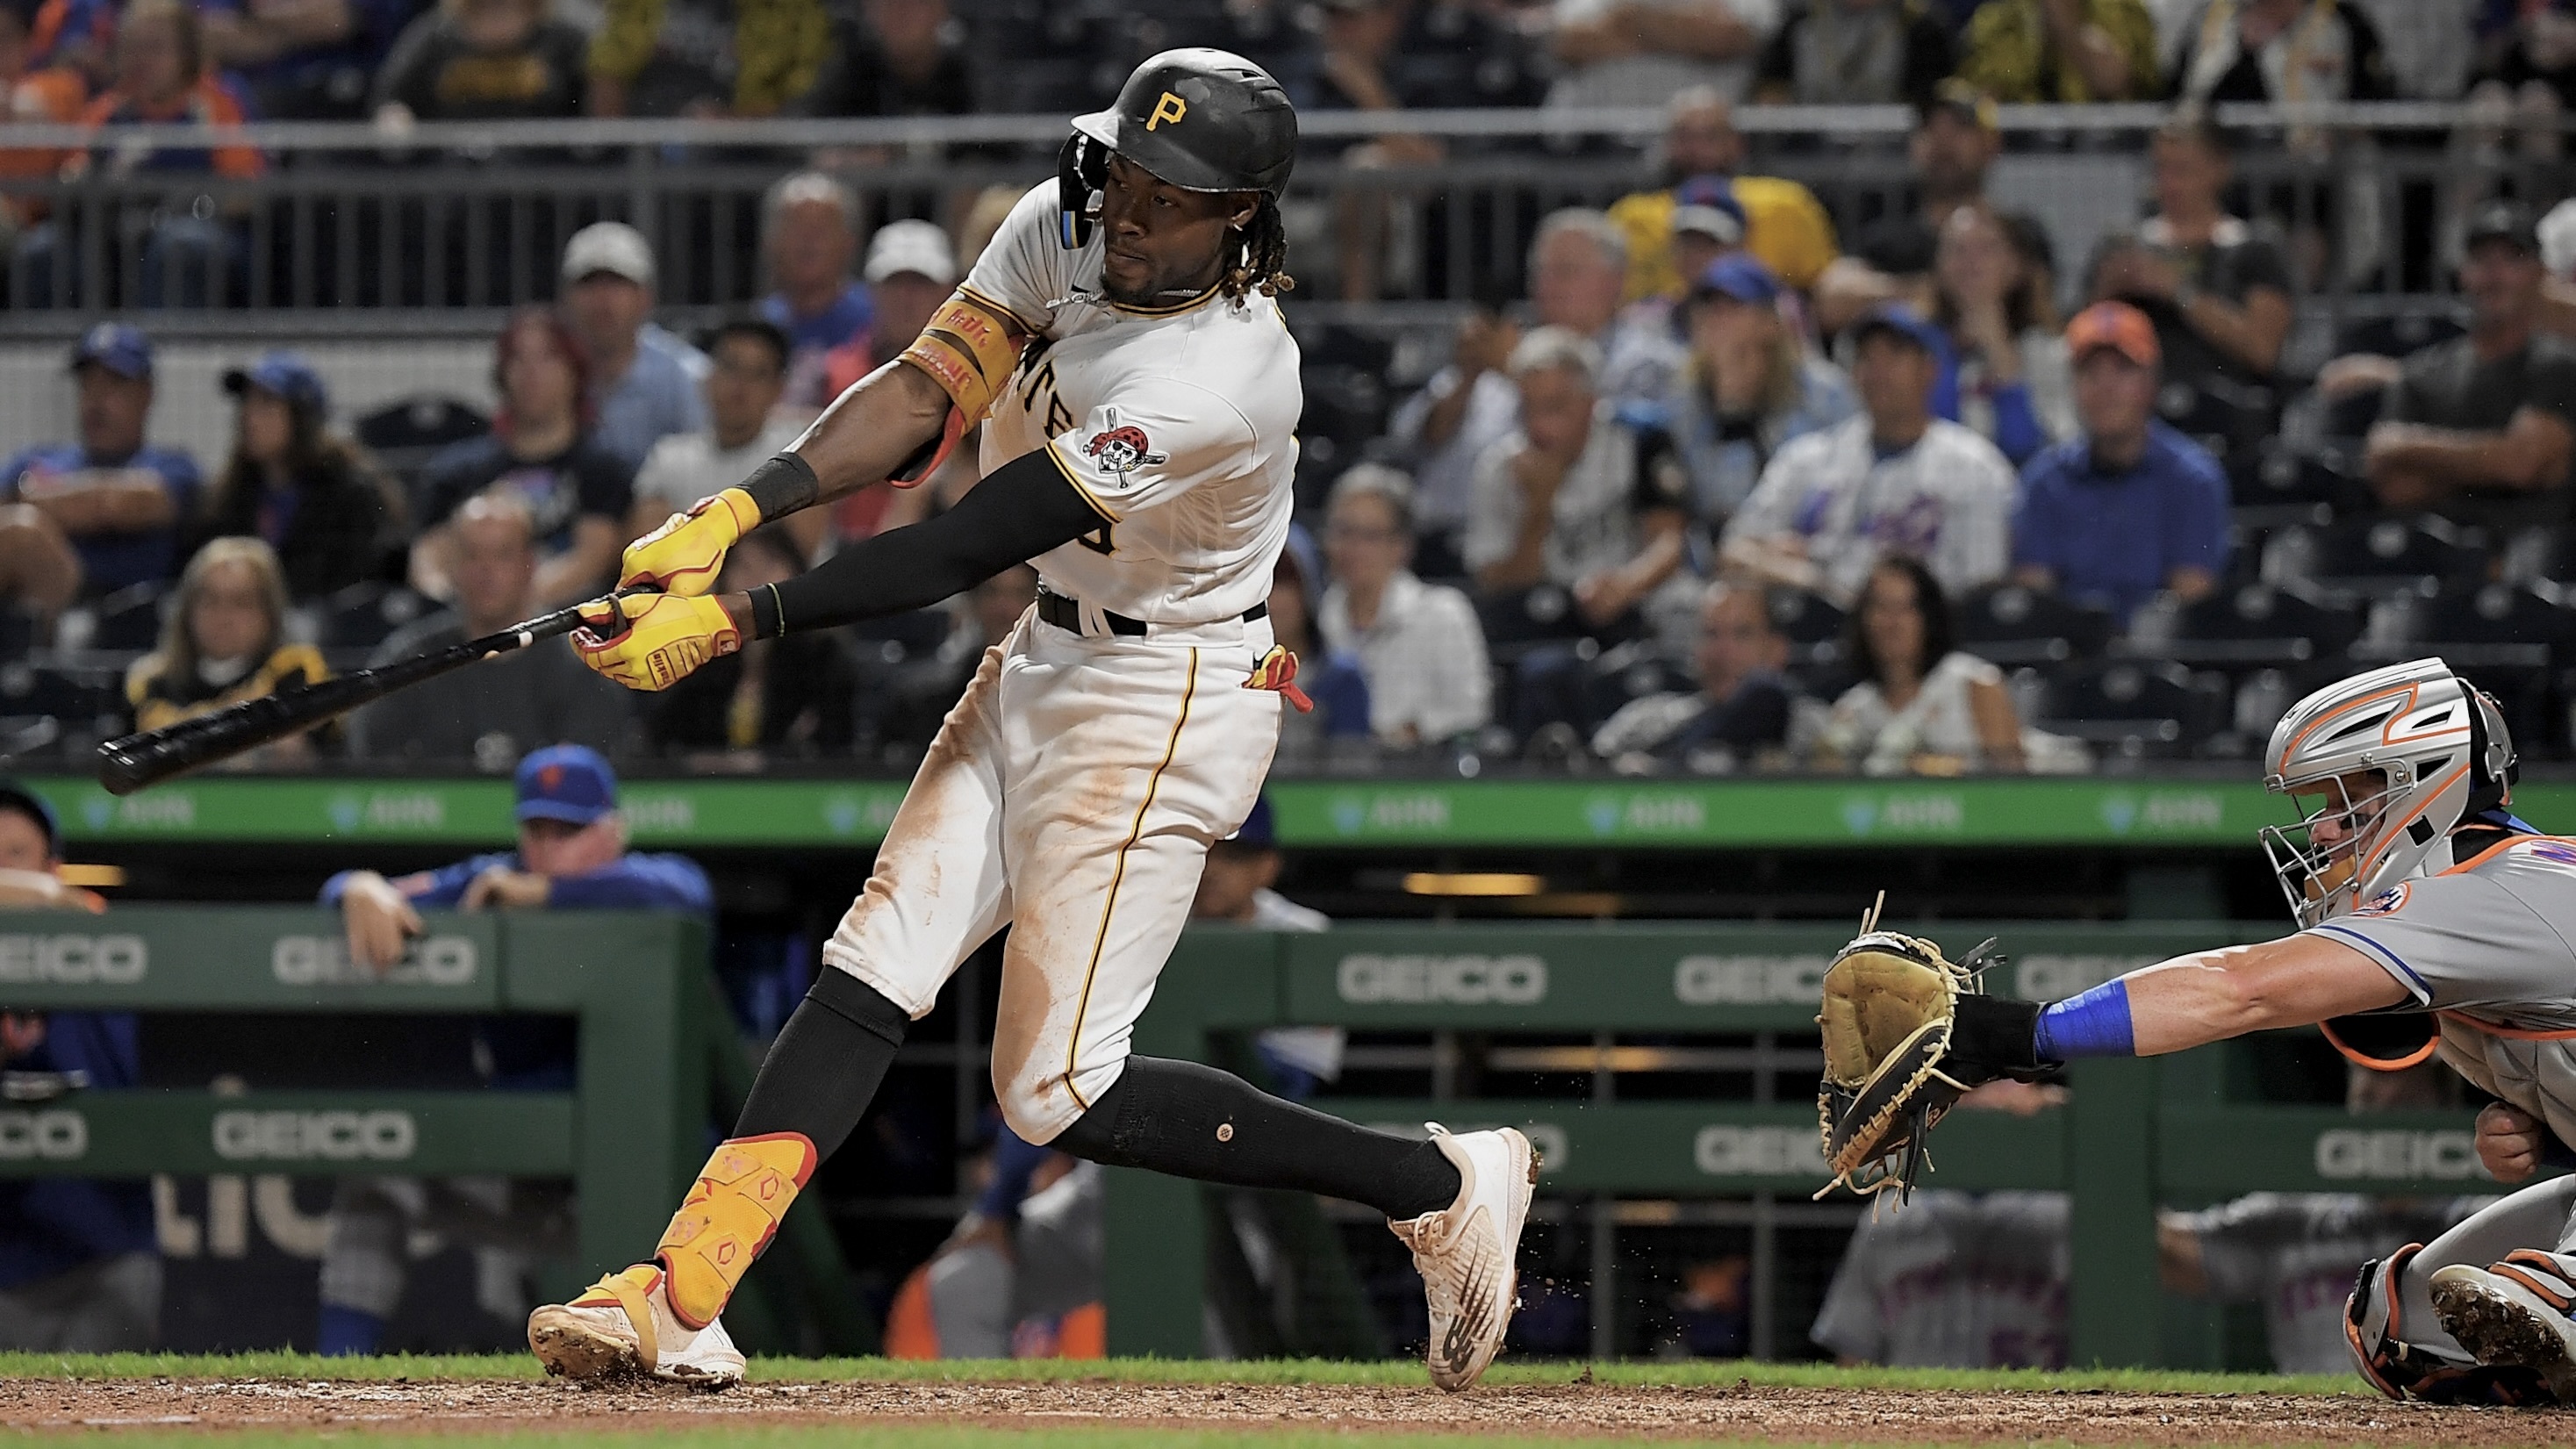 Oneil Cruz's homer into the Allegheny serves as a reminder of his freakish  talent